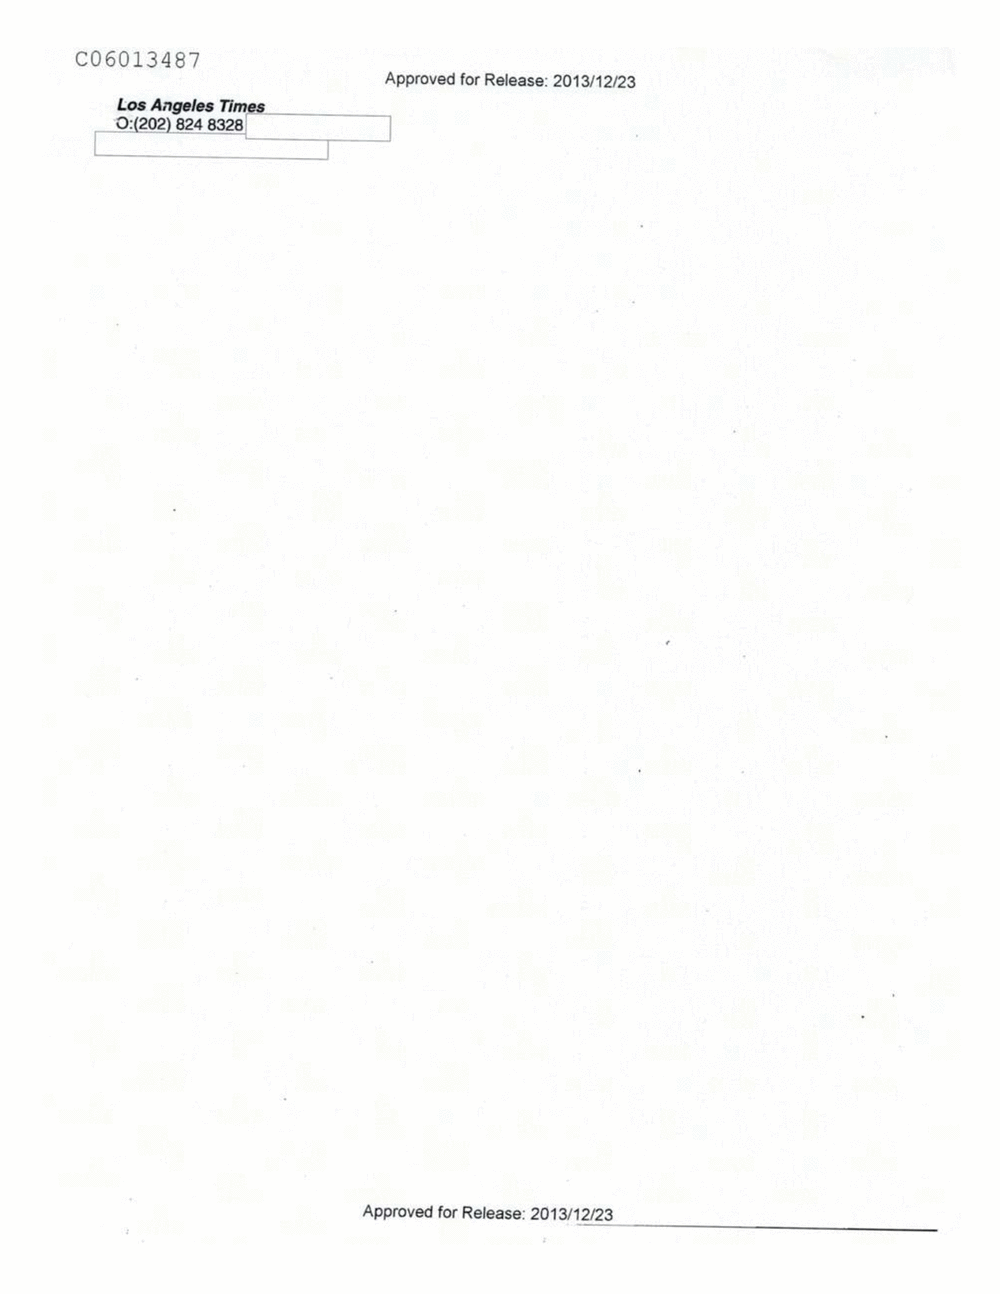 Page 336 from Email Correspondence Between Reporters and CIA Flacks